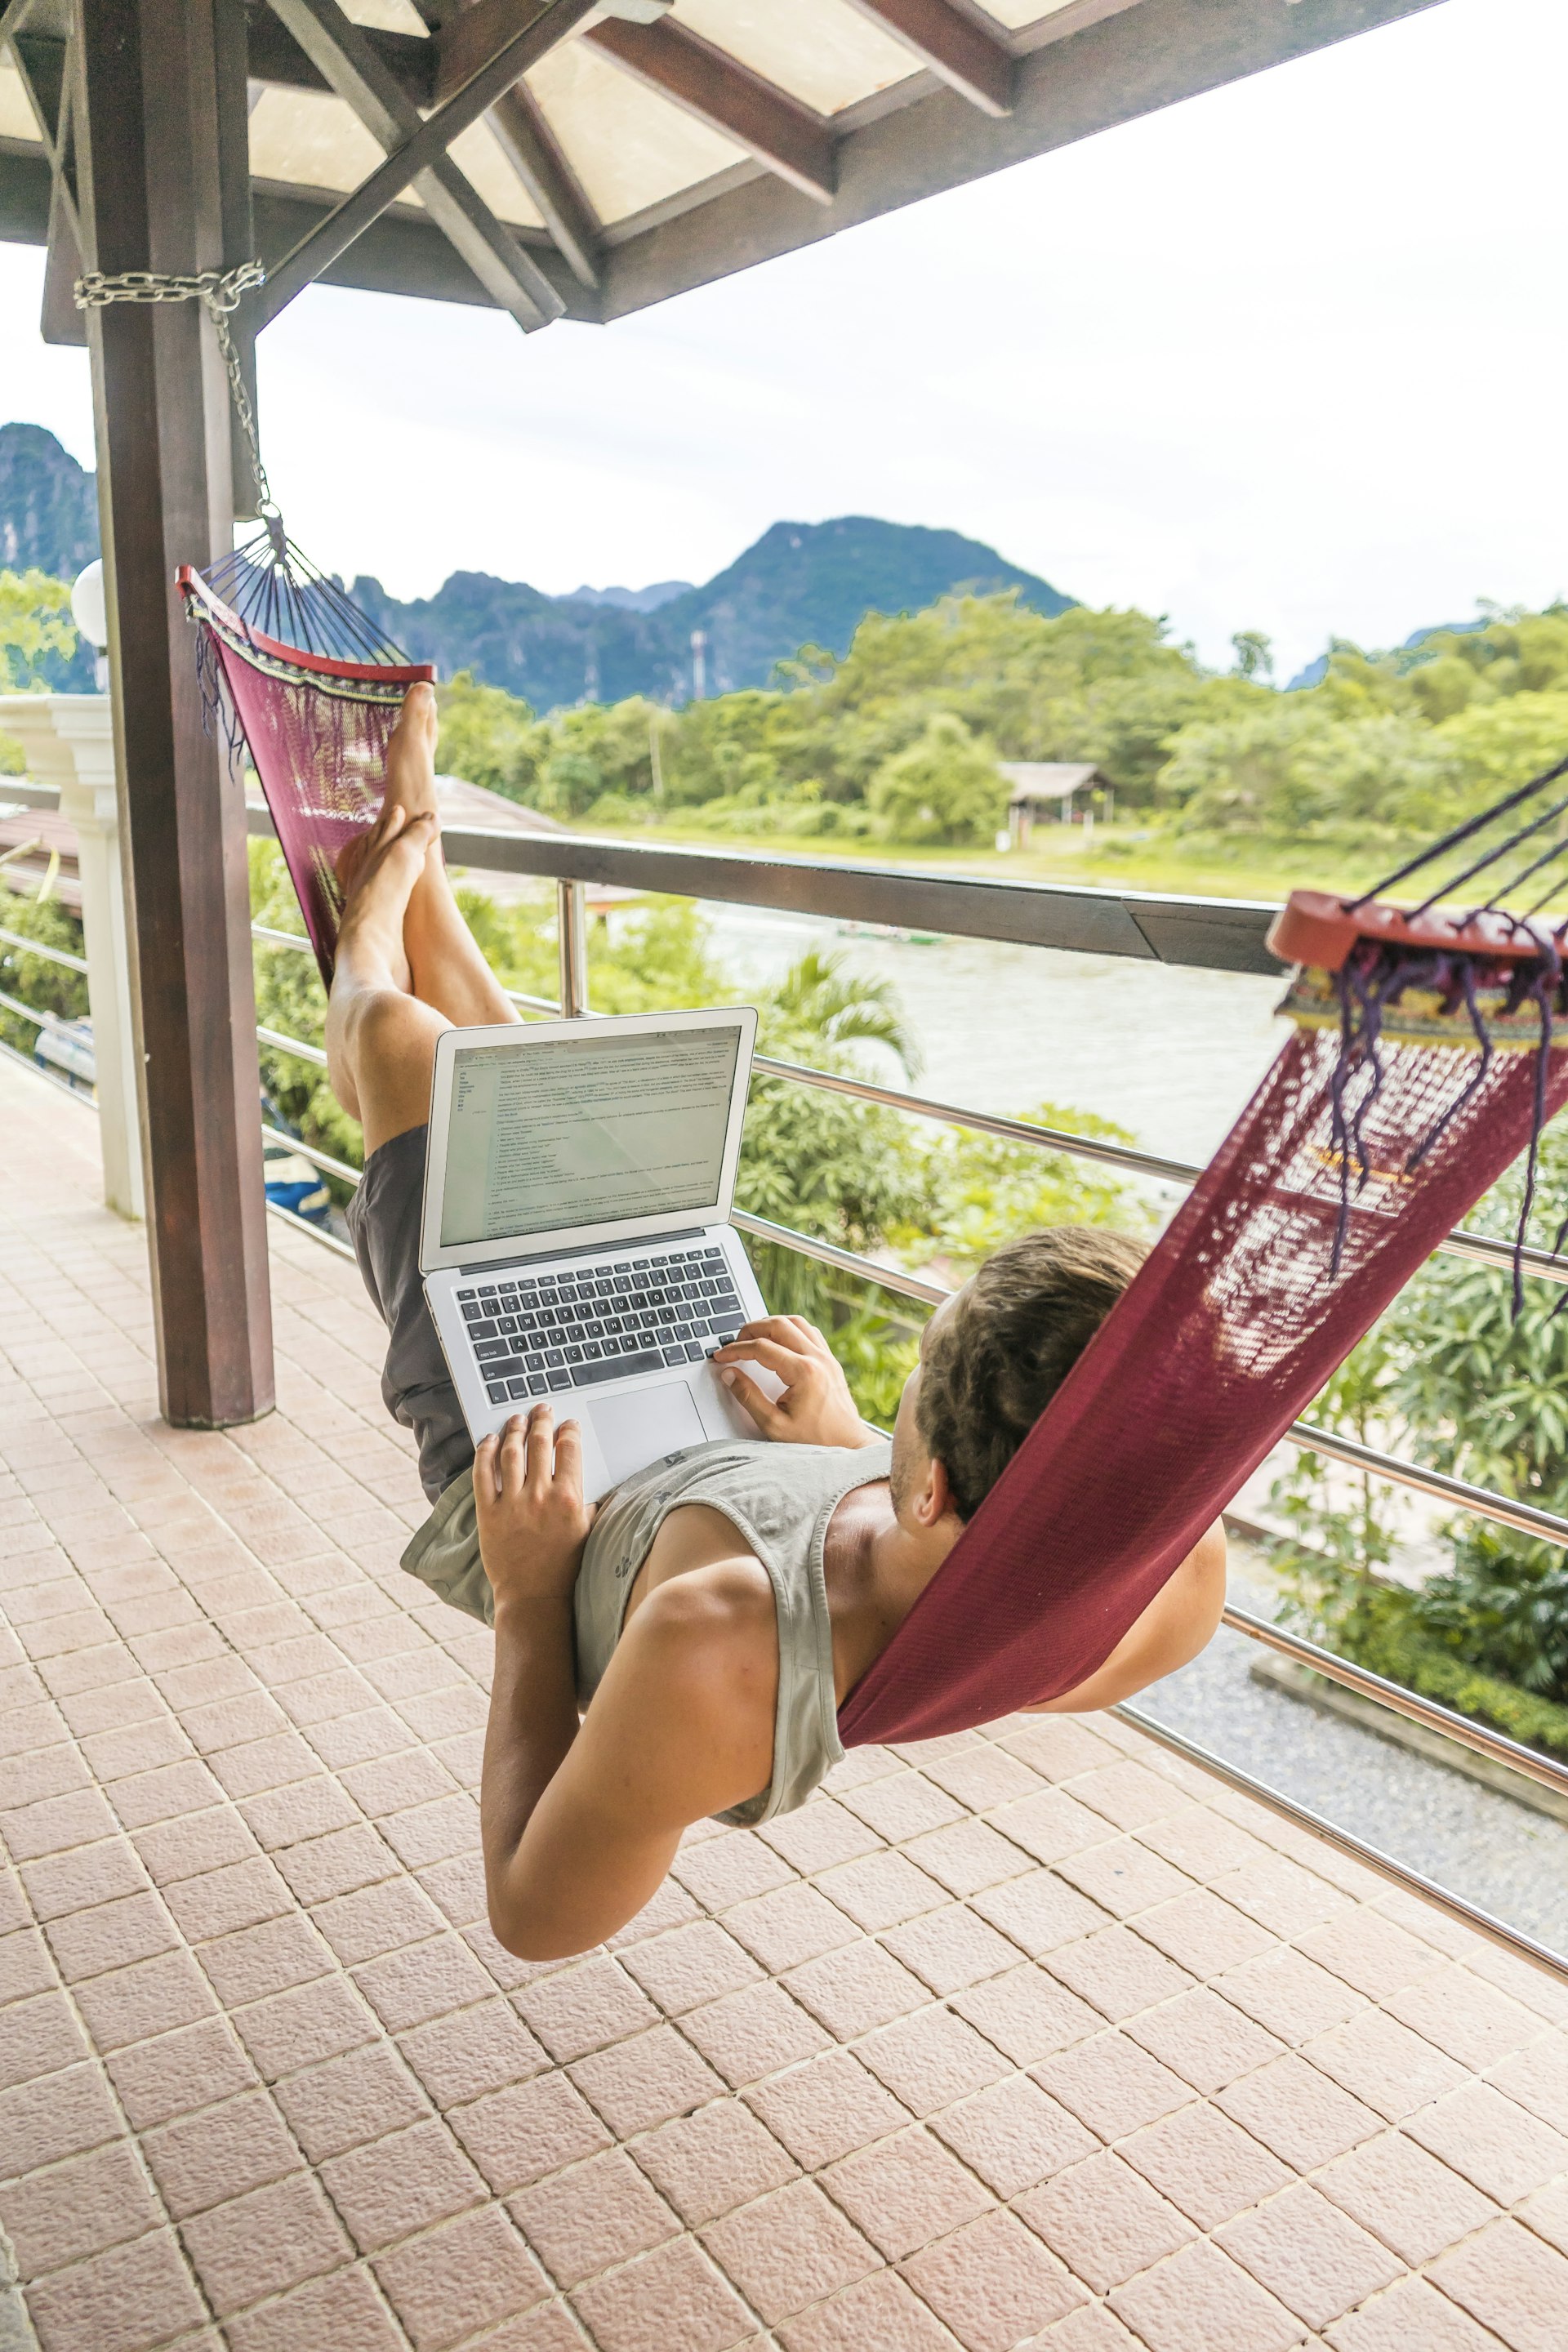 Young man lying in hammock using laptop on decking that overlooks a river